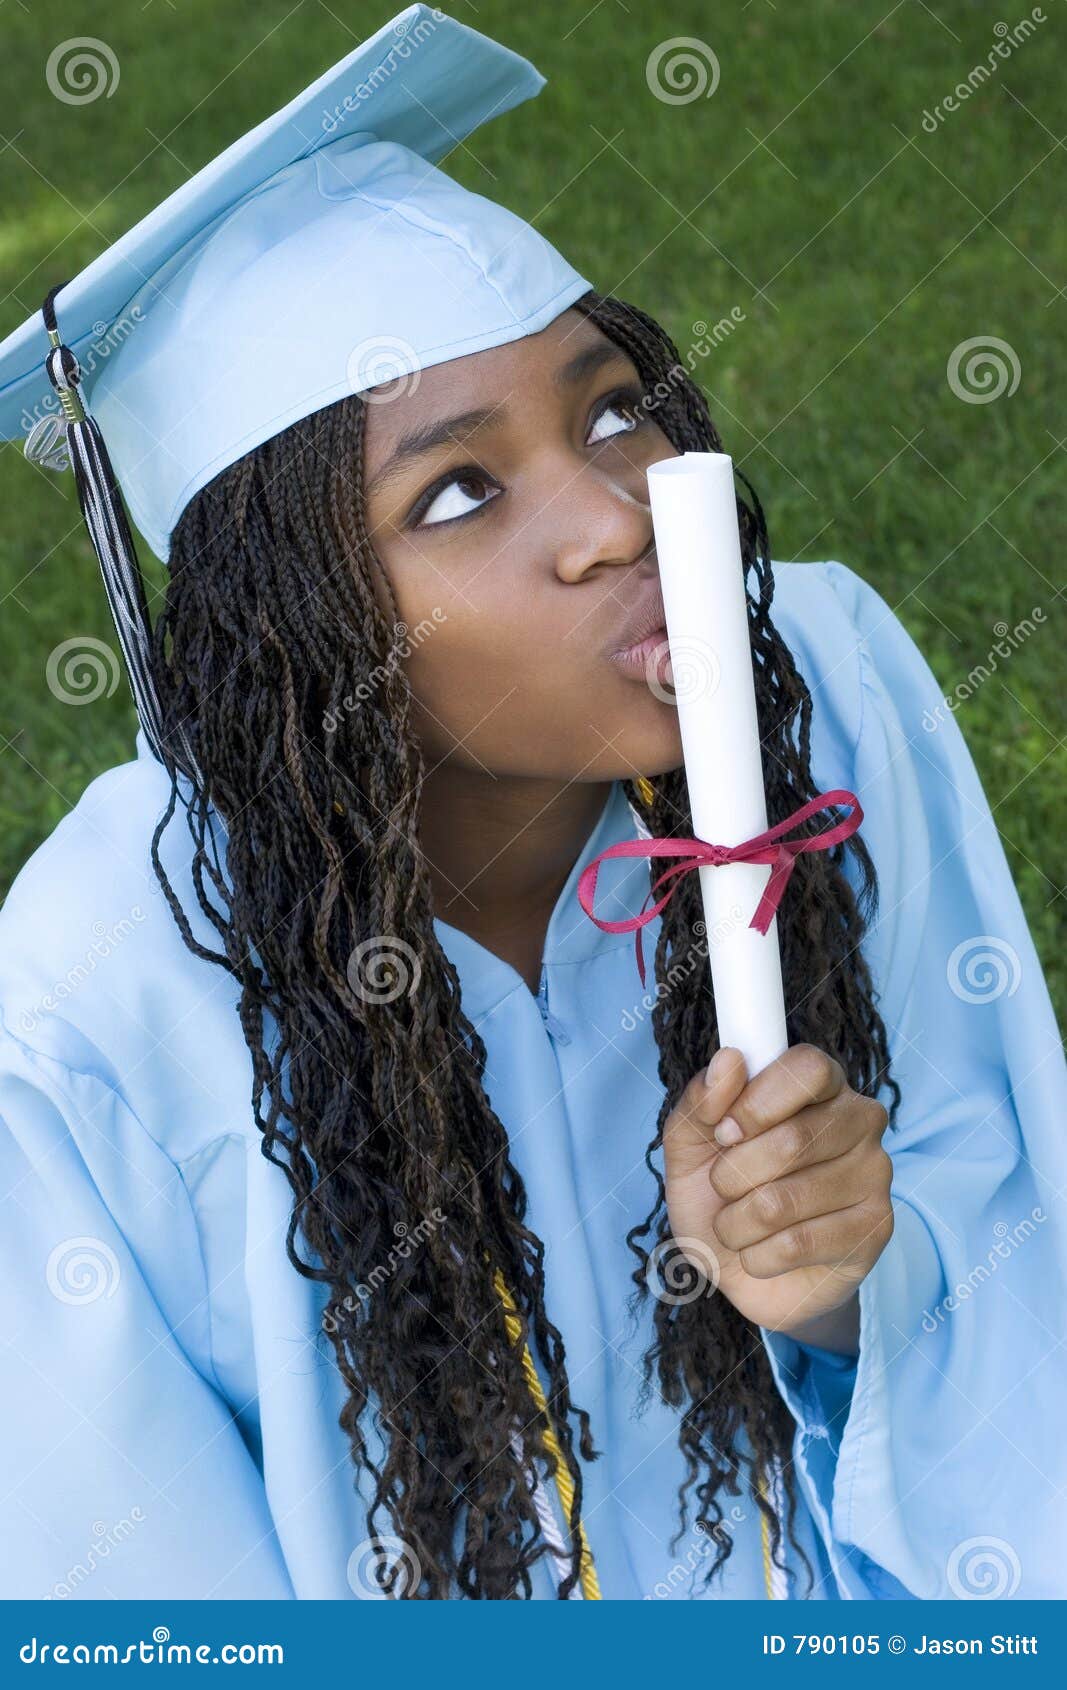 Why You Need Cap & Gown Photos: Graduation Photoshoot Inspo